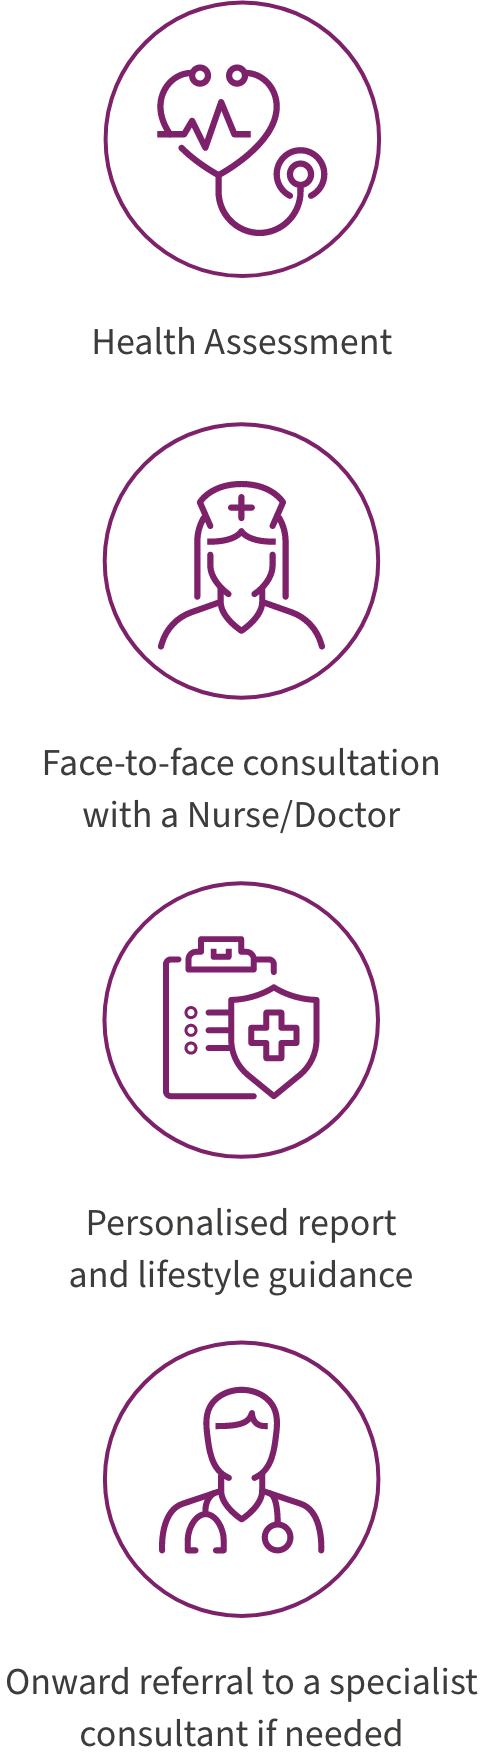 Health Assessment > Face-to-face consultation 
with a Nurse/Doctor > Personalised report and lifestyle guidance > Onward referral to a specialist consultant if needed 